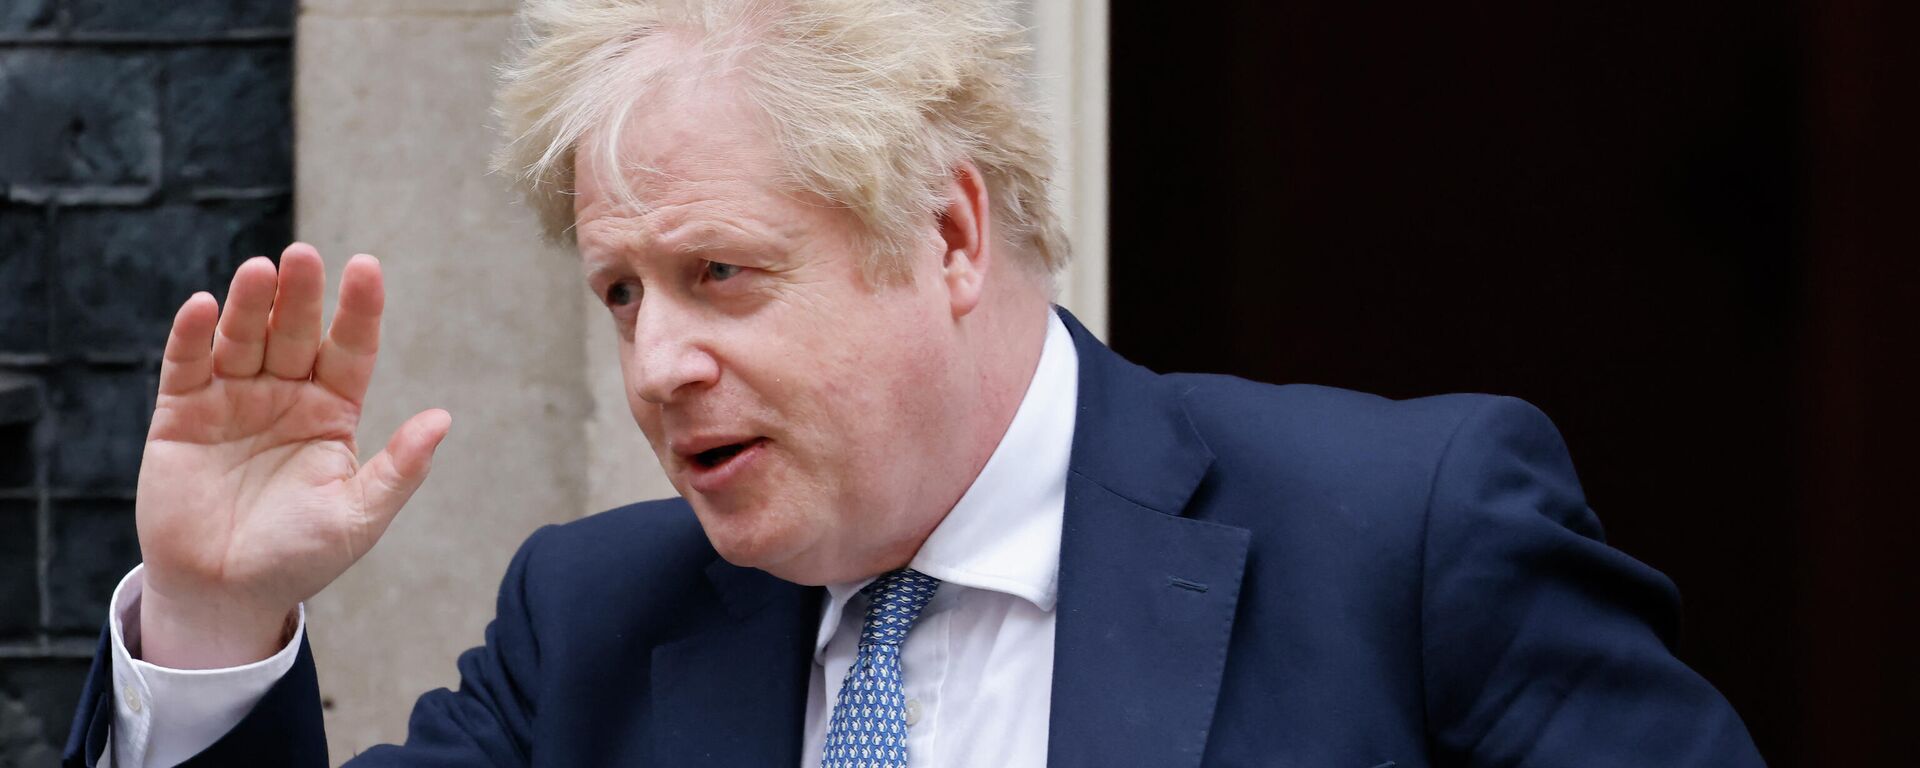 Britain's Prime Minister Boris Johnson waves as he leaves from 10 Downing Street in central London on February 2, 2022 to take part in the weekly session of Prime Minister's Questions (PMQs) at the House of Commons. - Sputnik International, 1920, 21.04.2022